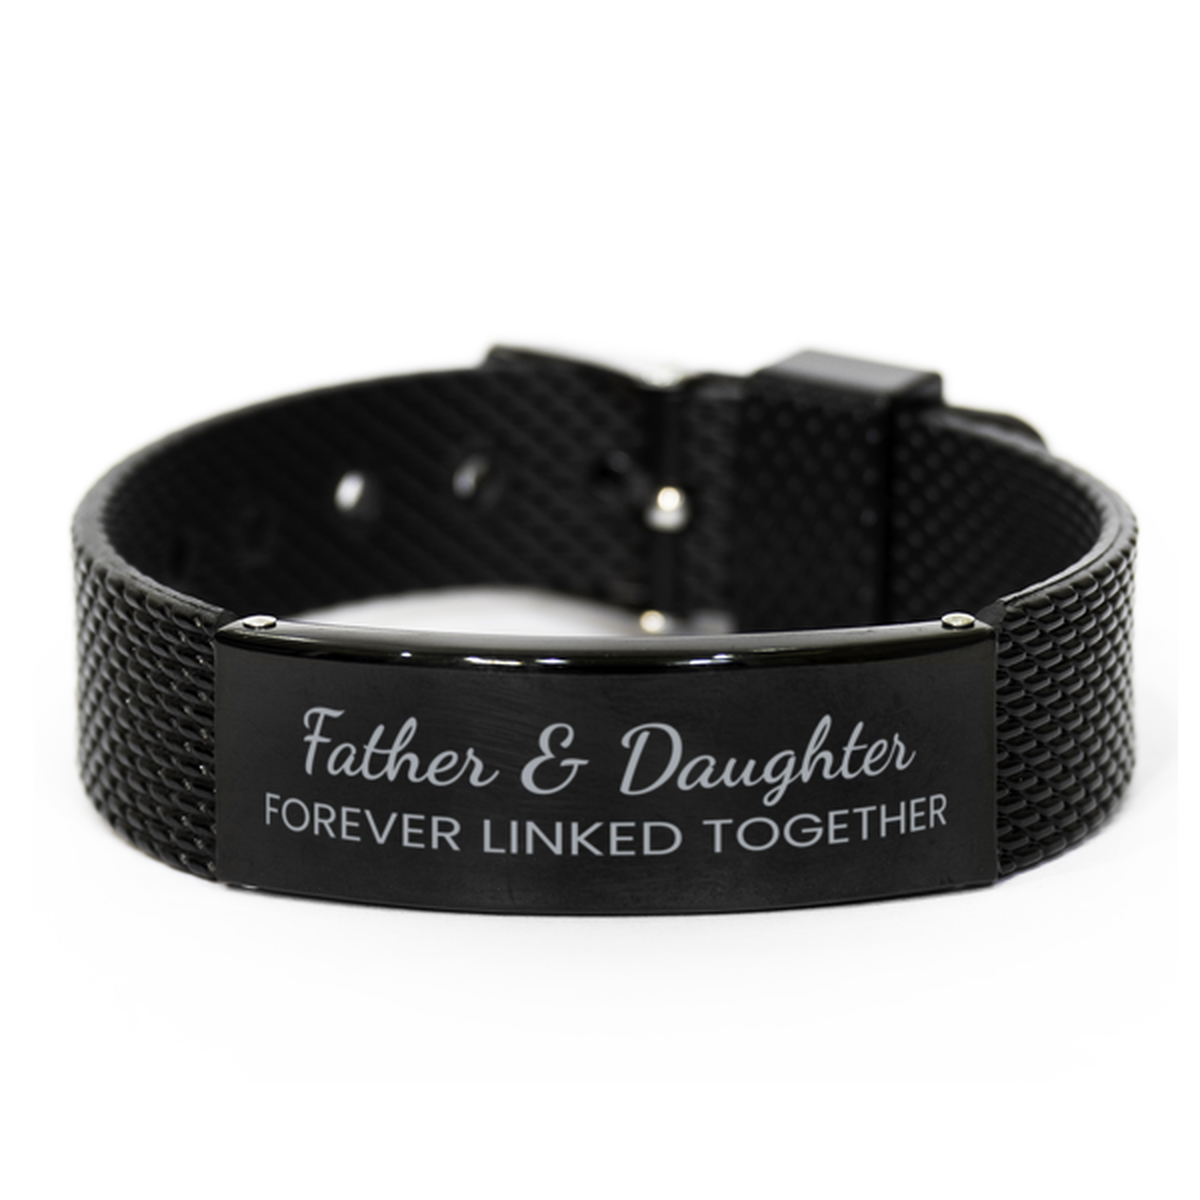 Father and Daughter Forever Linked Together Bracelet, Father Daughter Bracelet, Black Stainless Steel Leather Bracelet, Birthday, Christmas.